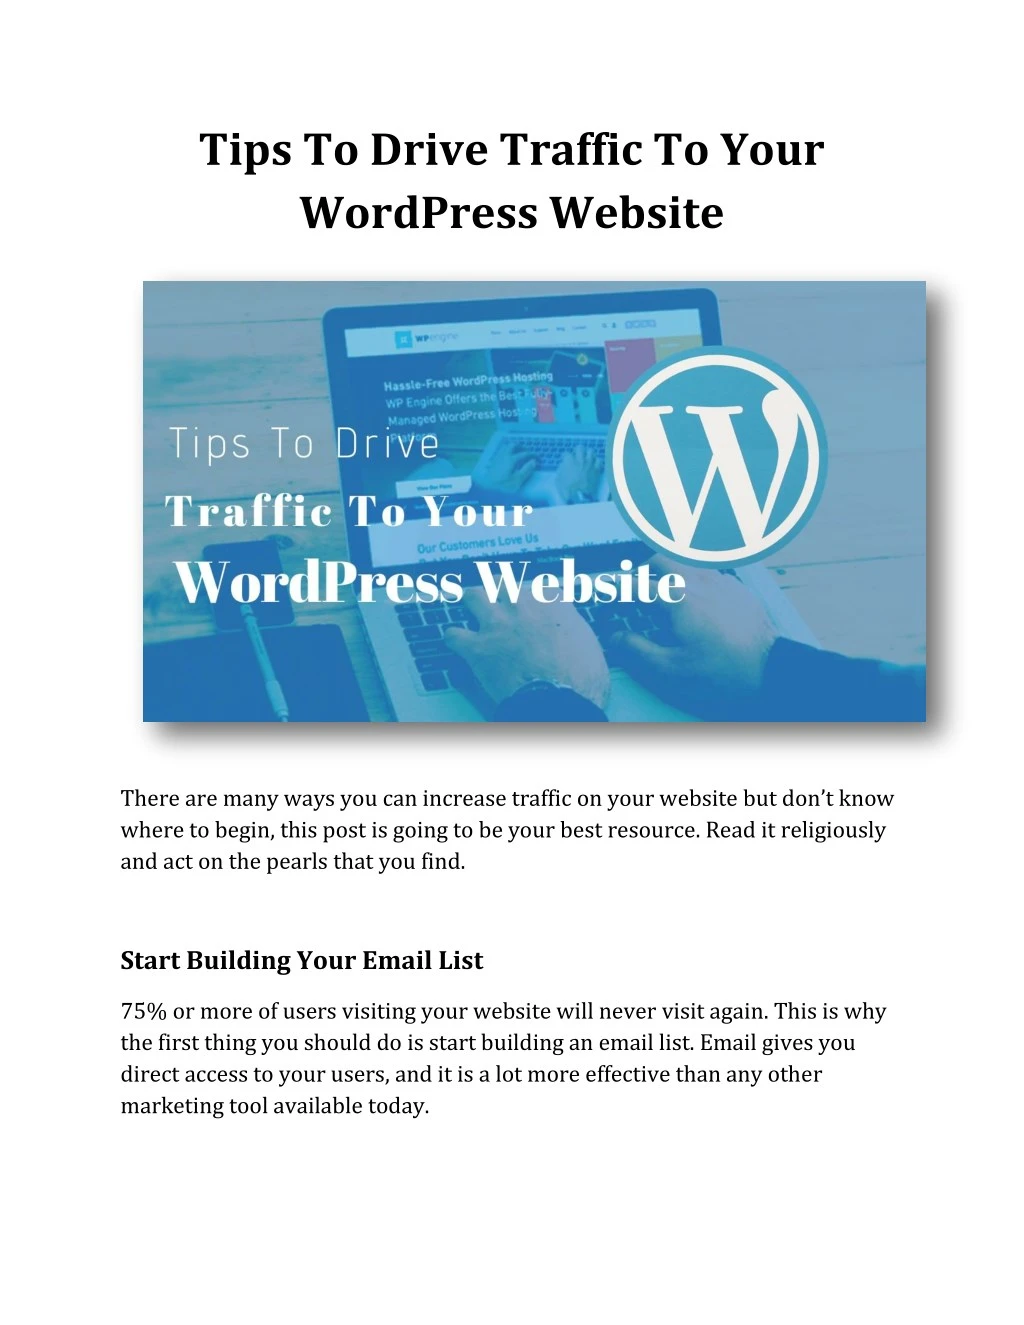 tips to drive traffic to your wordpress website